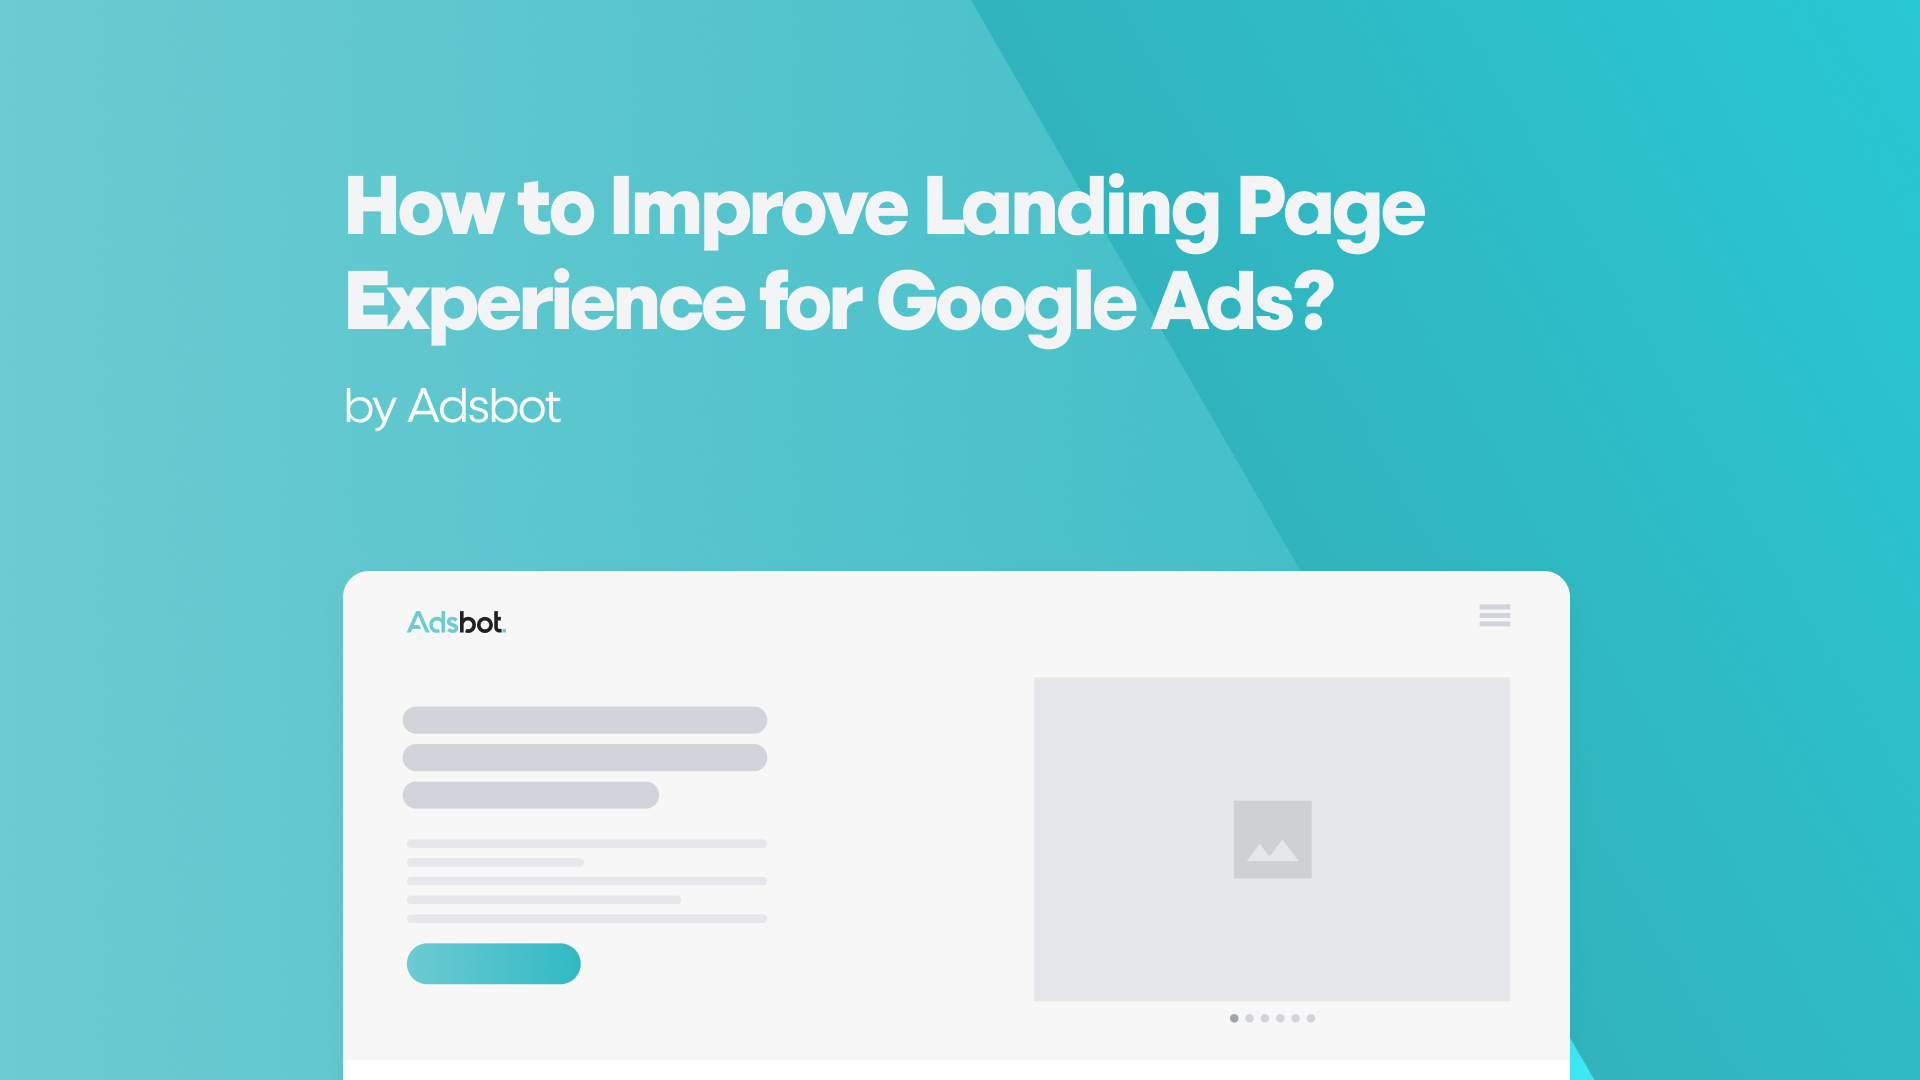 How to Improve Landing Page Experience for Google Ads?